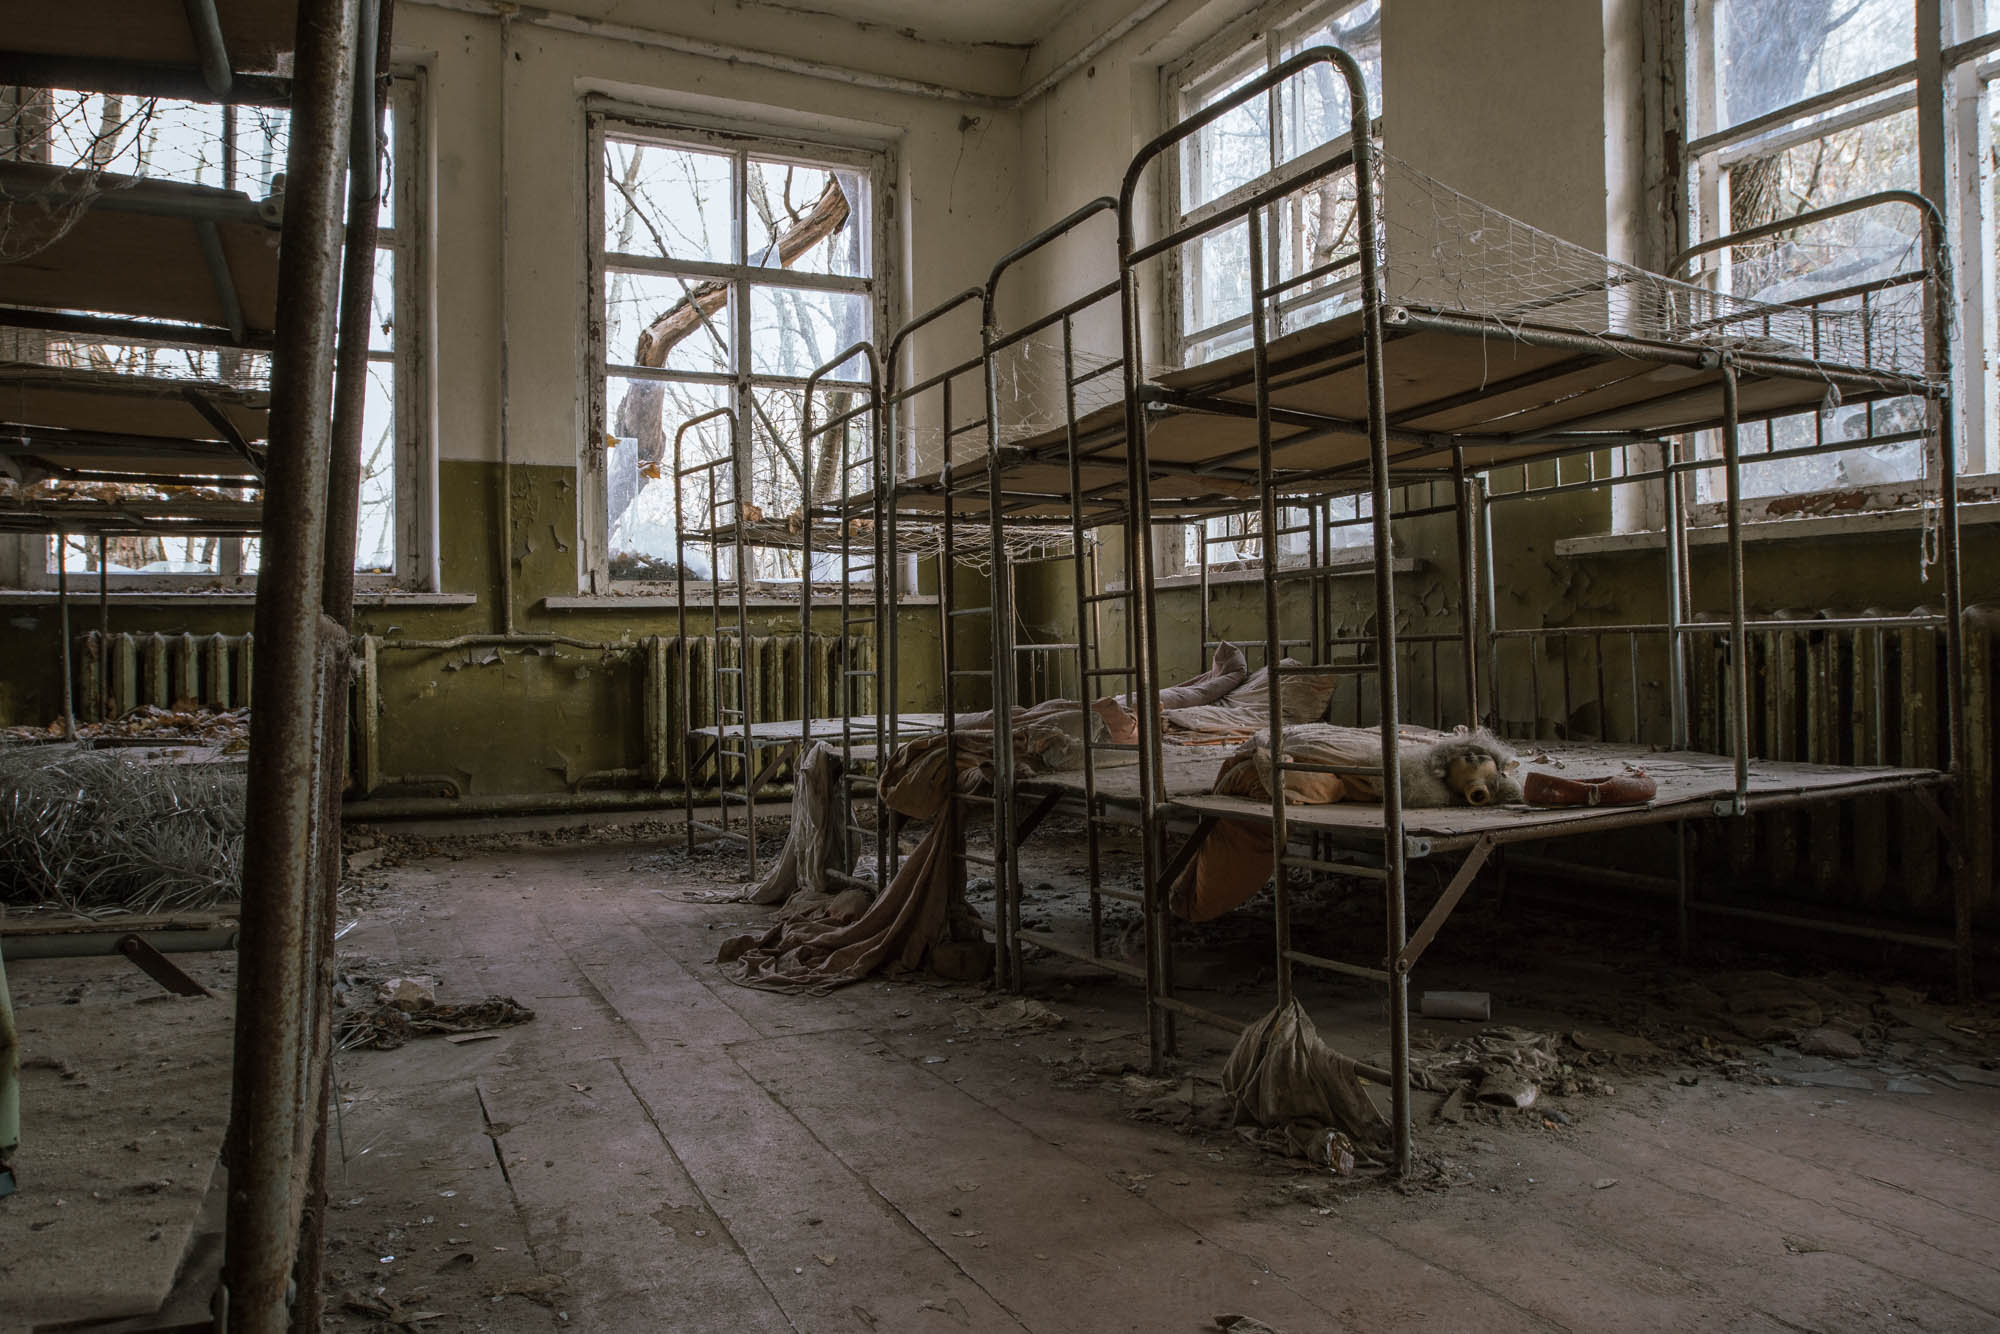 Chernobyl Exclusion